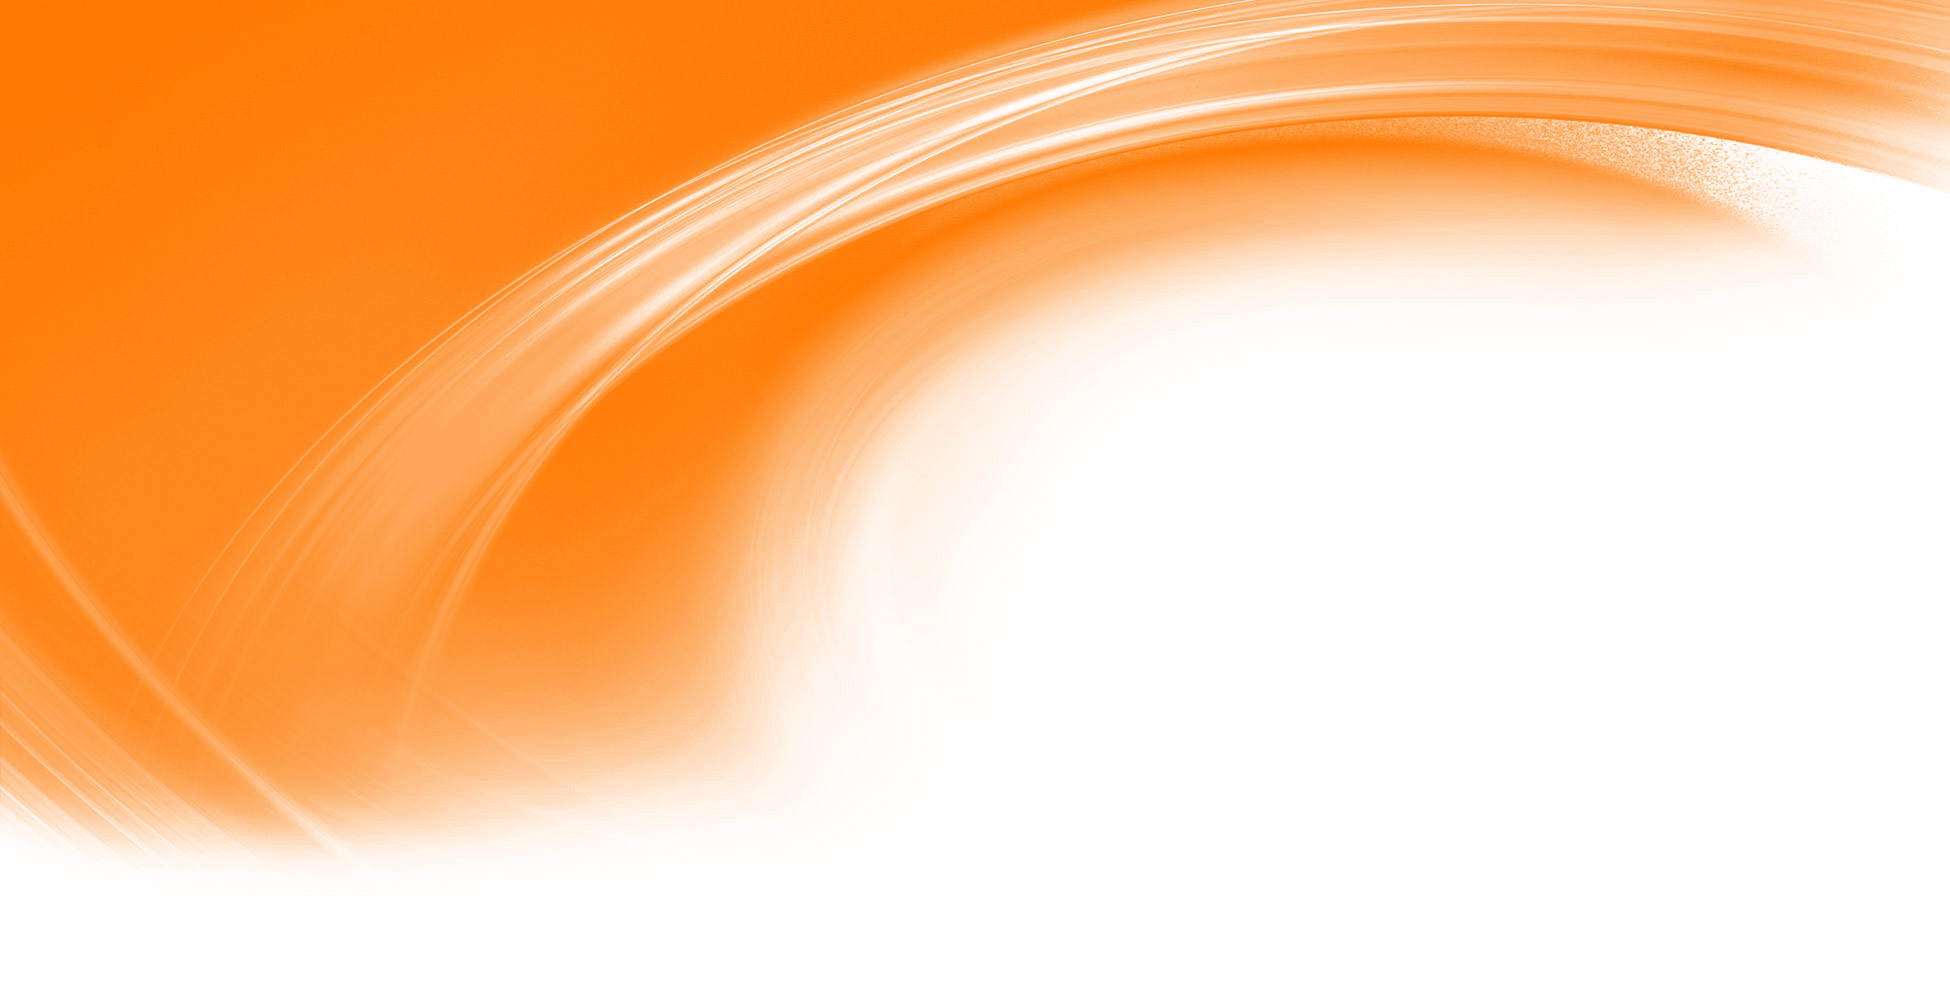 High Resolution Orange And White Background - HD Wallpaper 